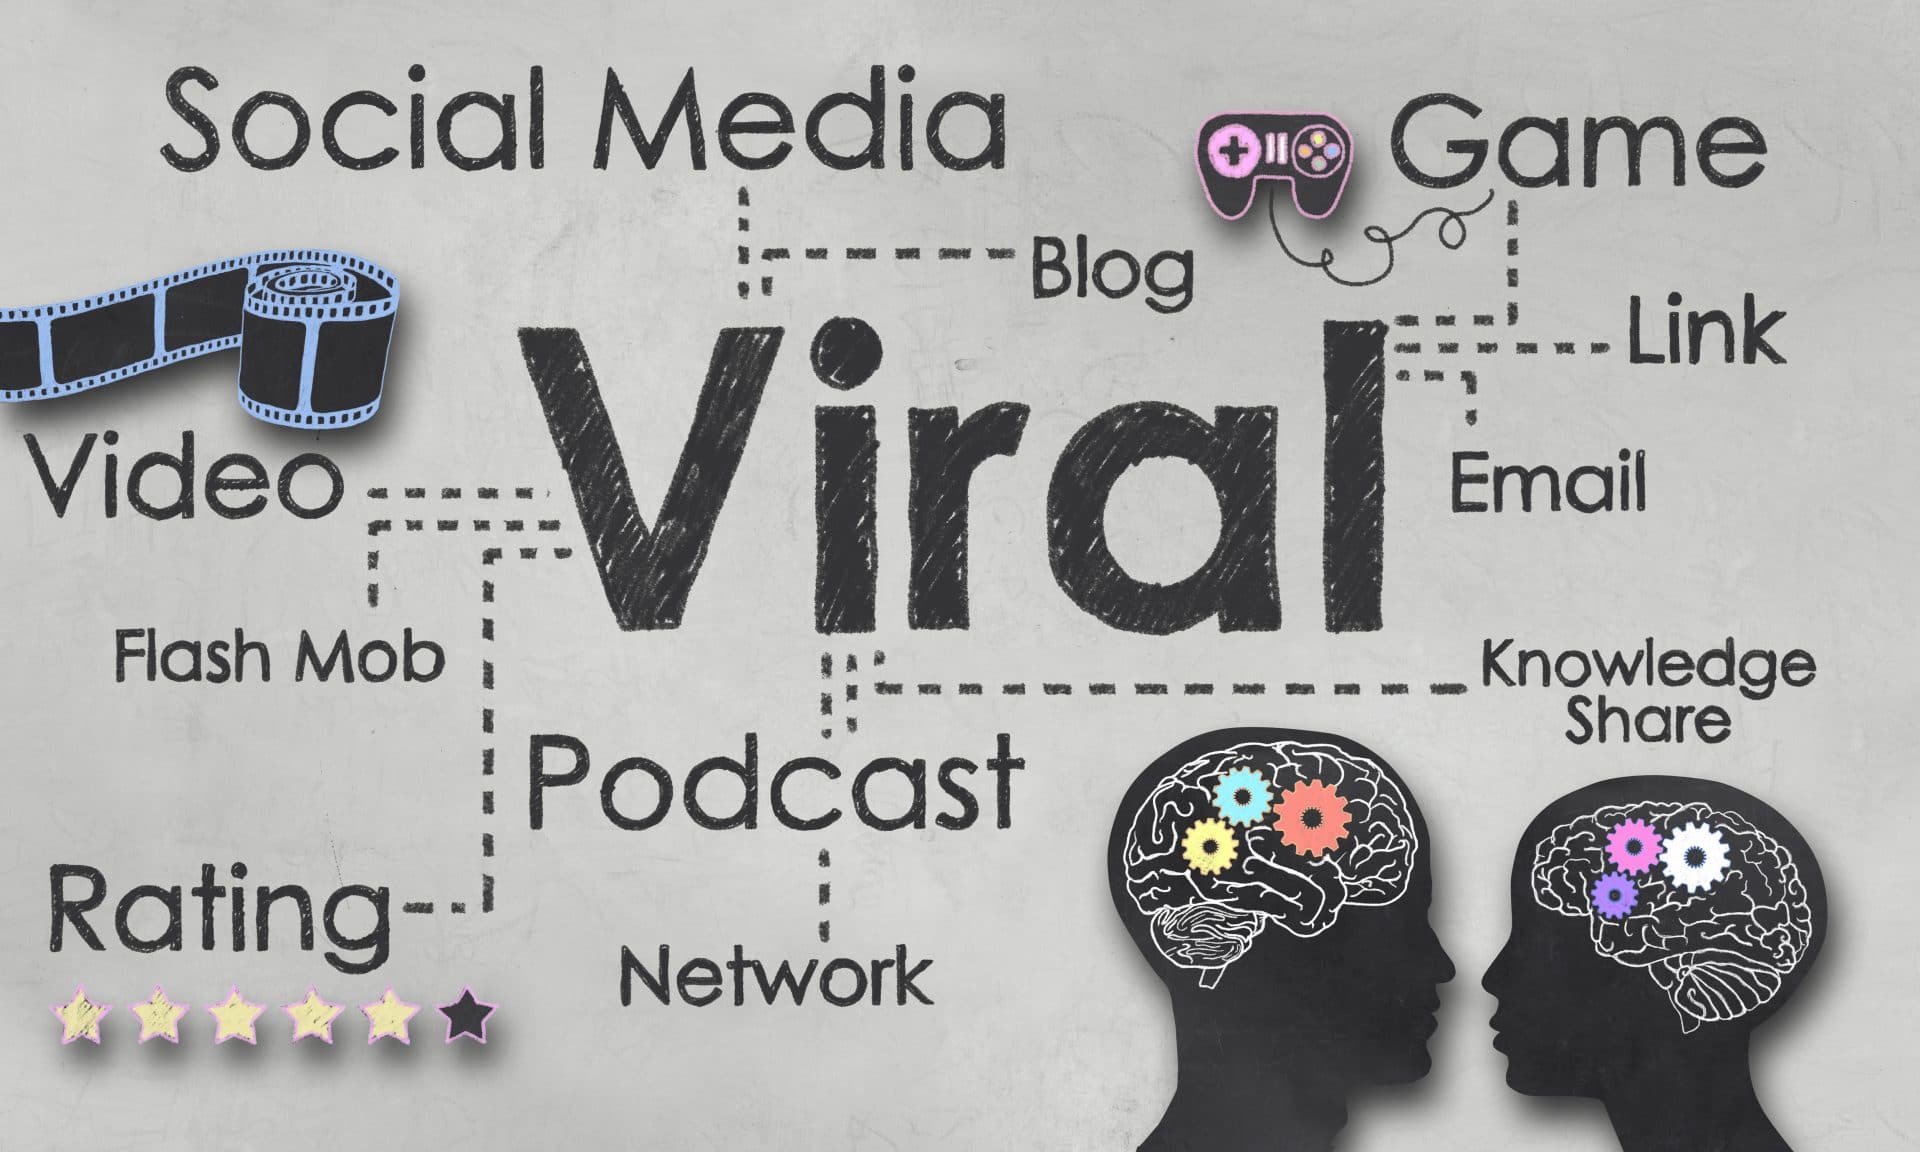 A mind map image shows the characteristics of viral content, which include being shareable, having a high potential to go viral, and being able to generate a lot of engagement.